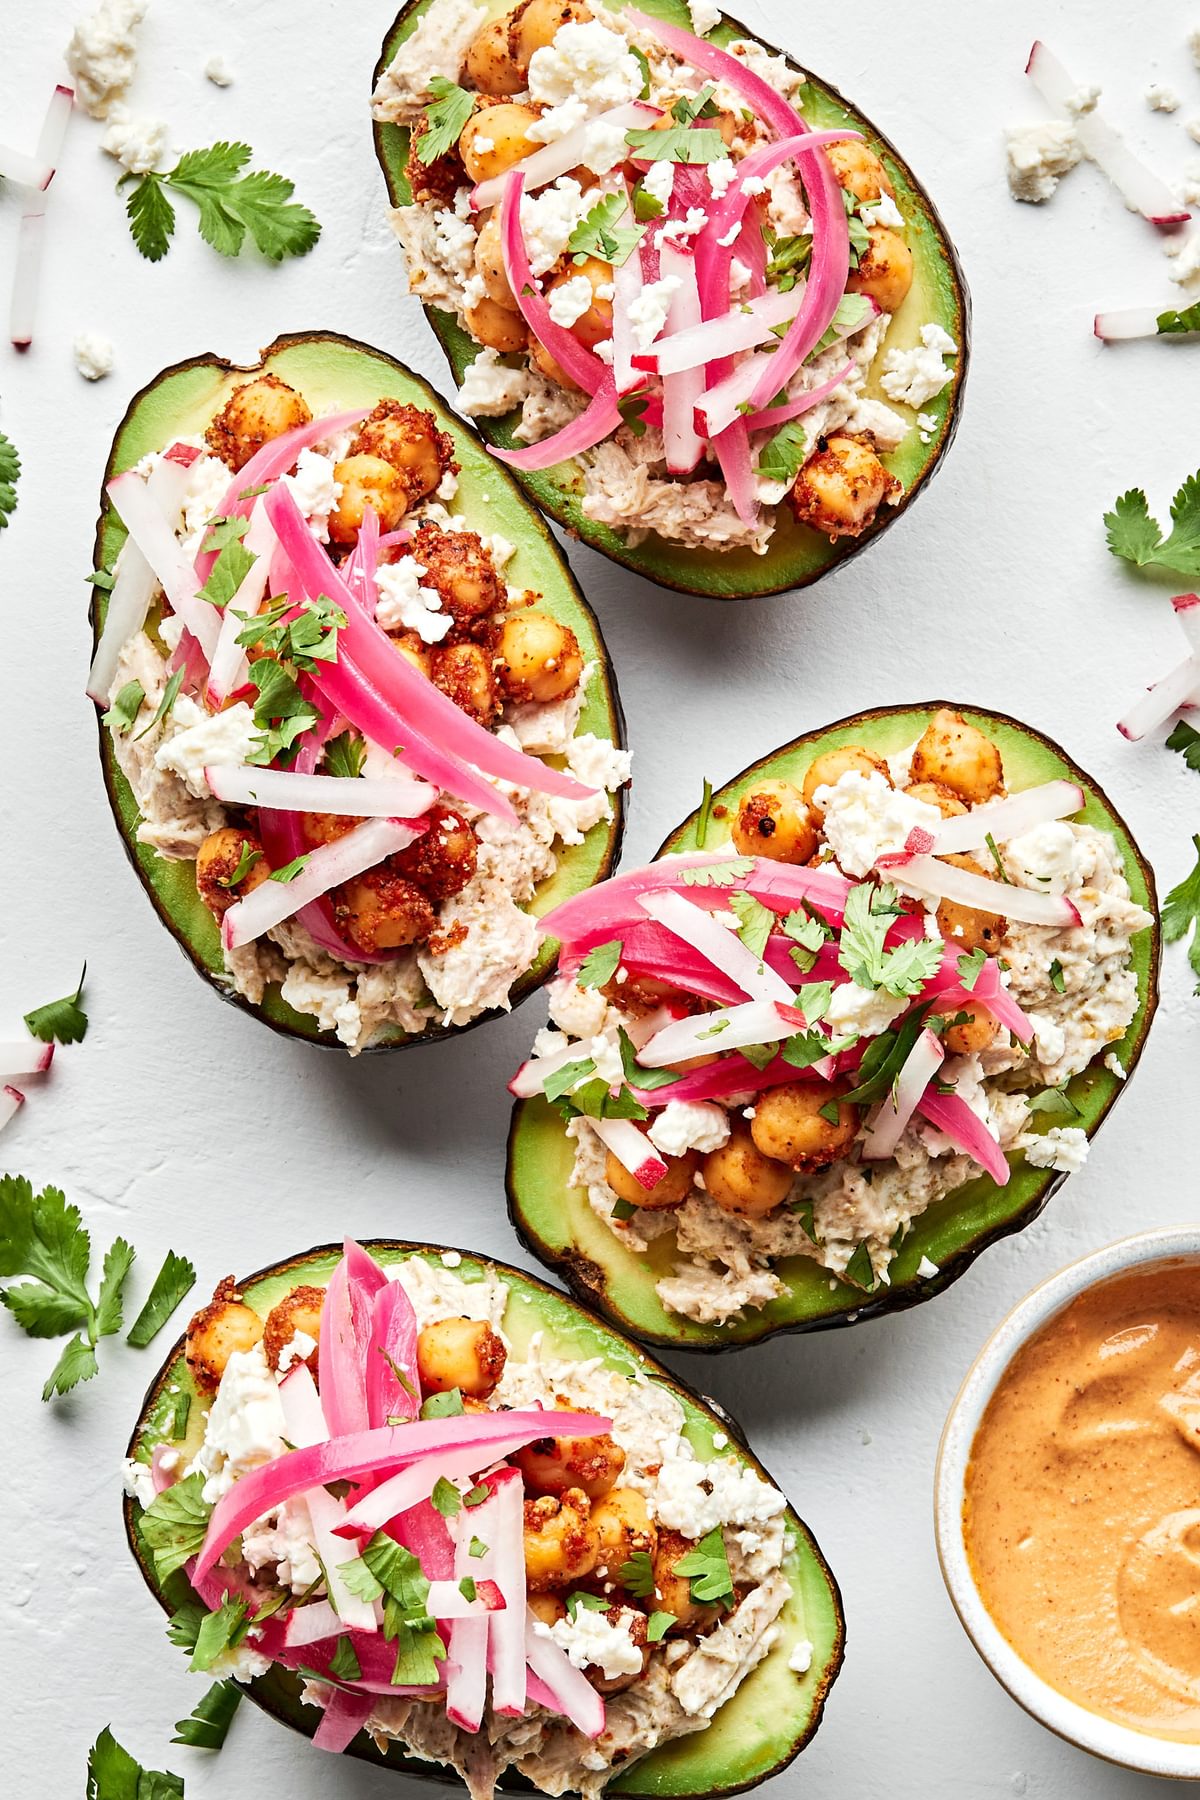 2 avocados stuffed with tuna salad, topped with pickled red onions, feta cheese and vegan cashew cheese sauce